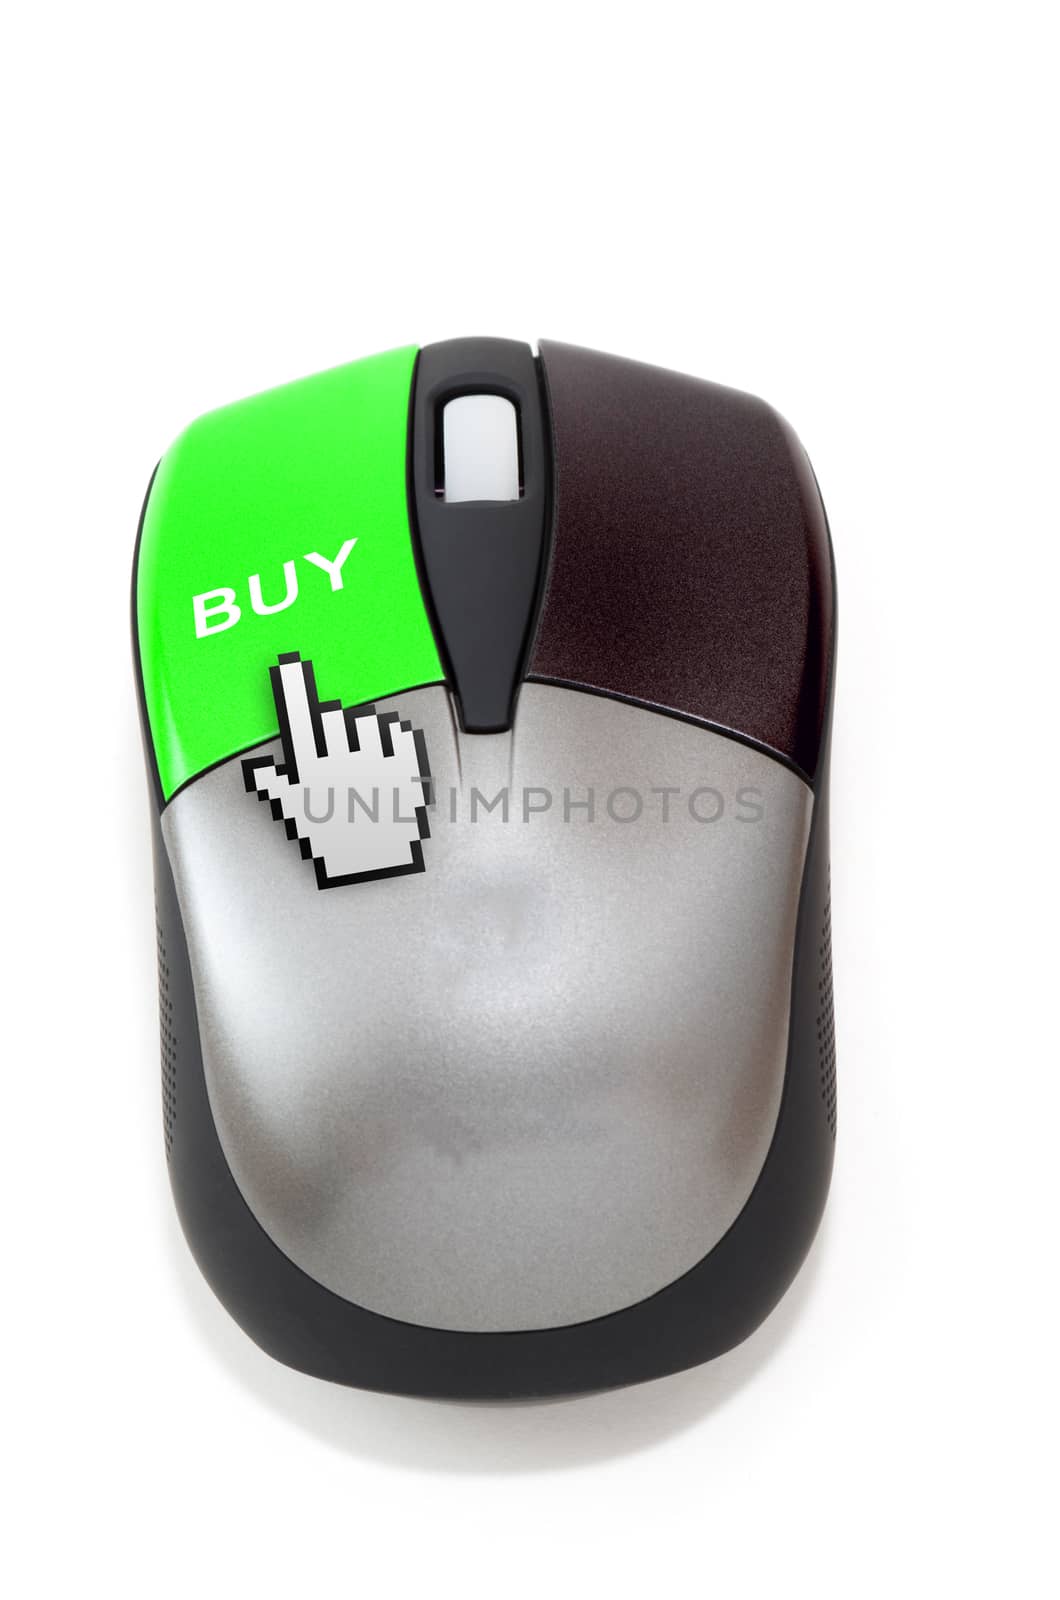 Hand cursor clicking on buy button by daoleduc